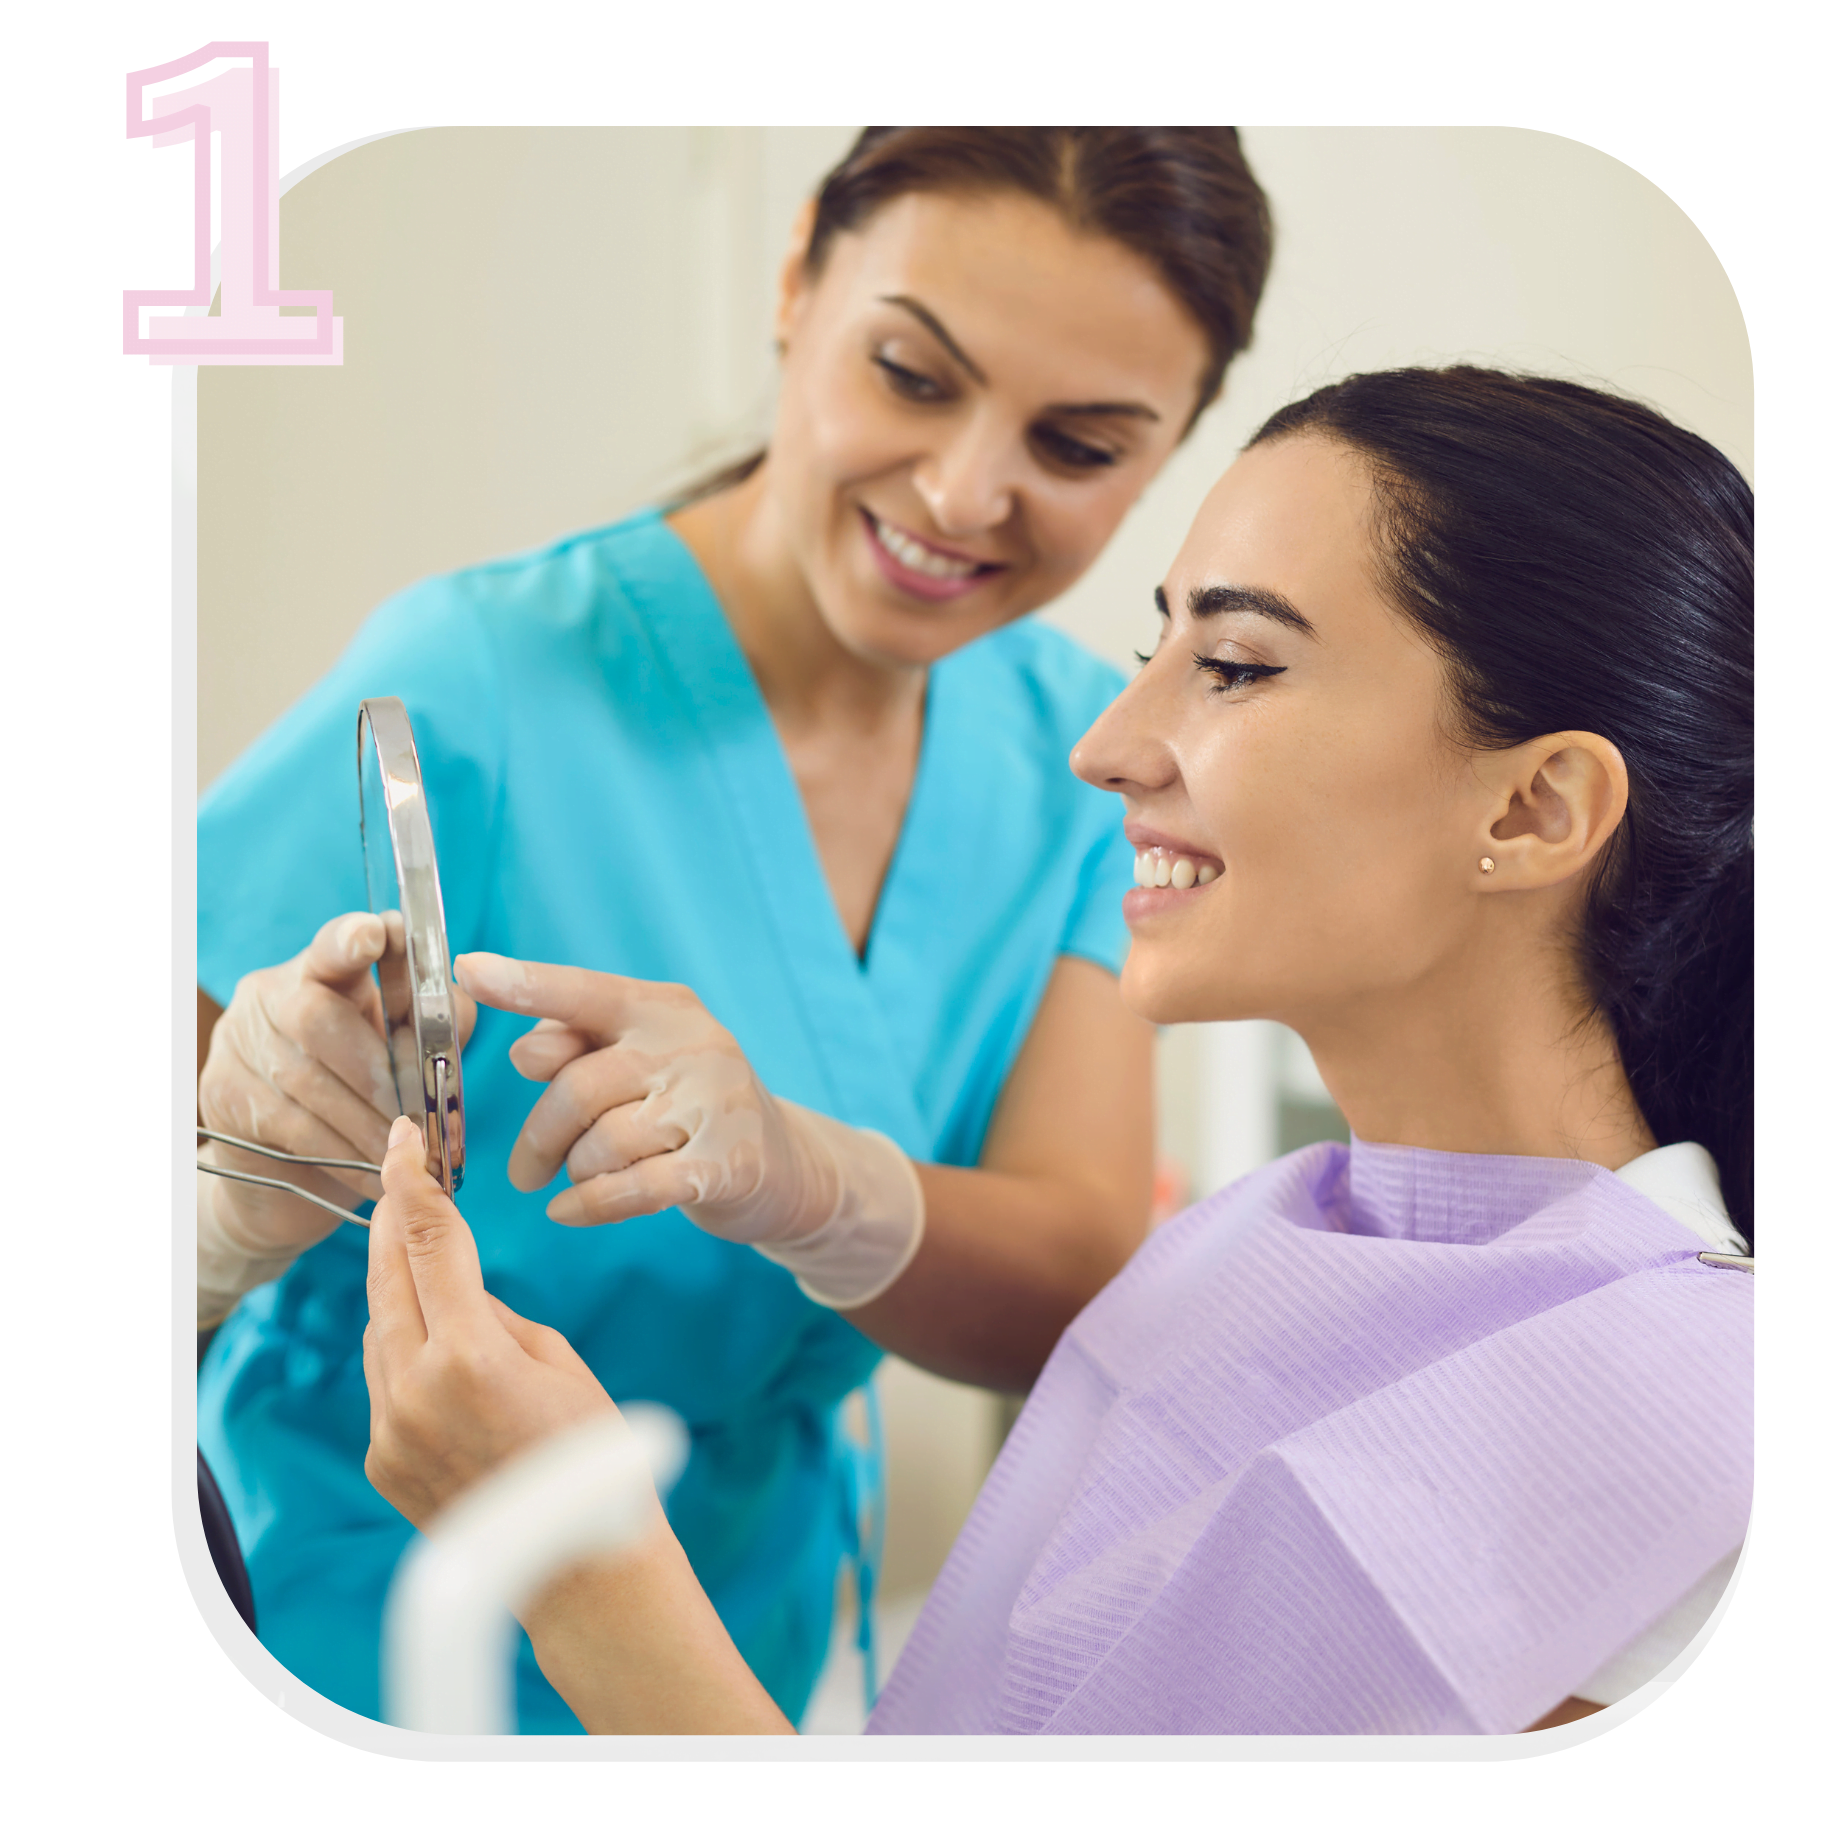 Woman looking into mirror after a teeth whitening treatment. Step 1 is to become trained and certified.